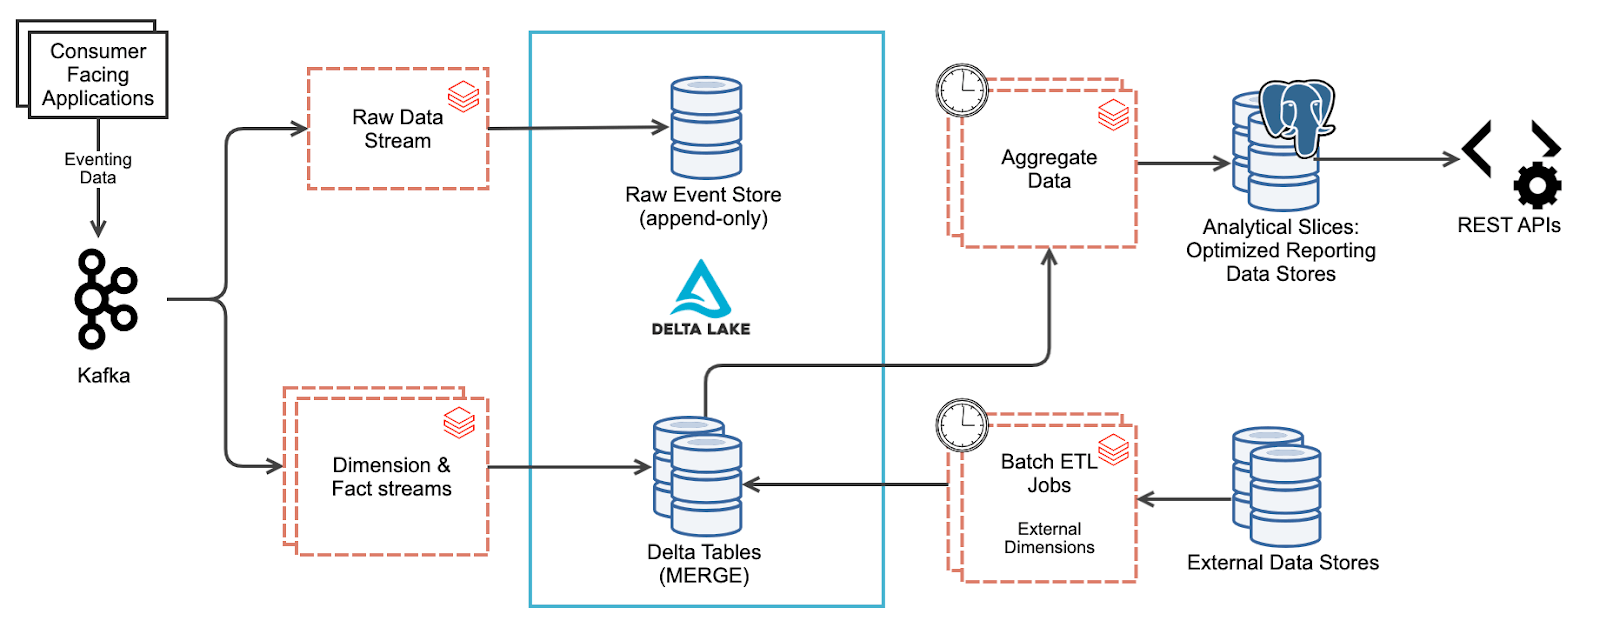 The architecture and constraints of a typical analytics and reporting hybrid ETL structure.